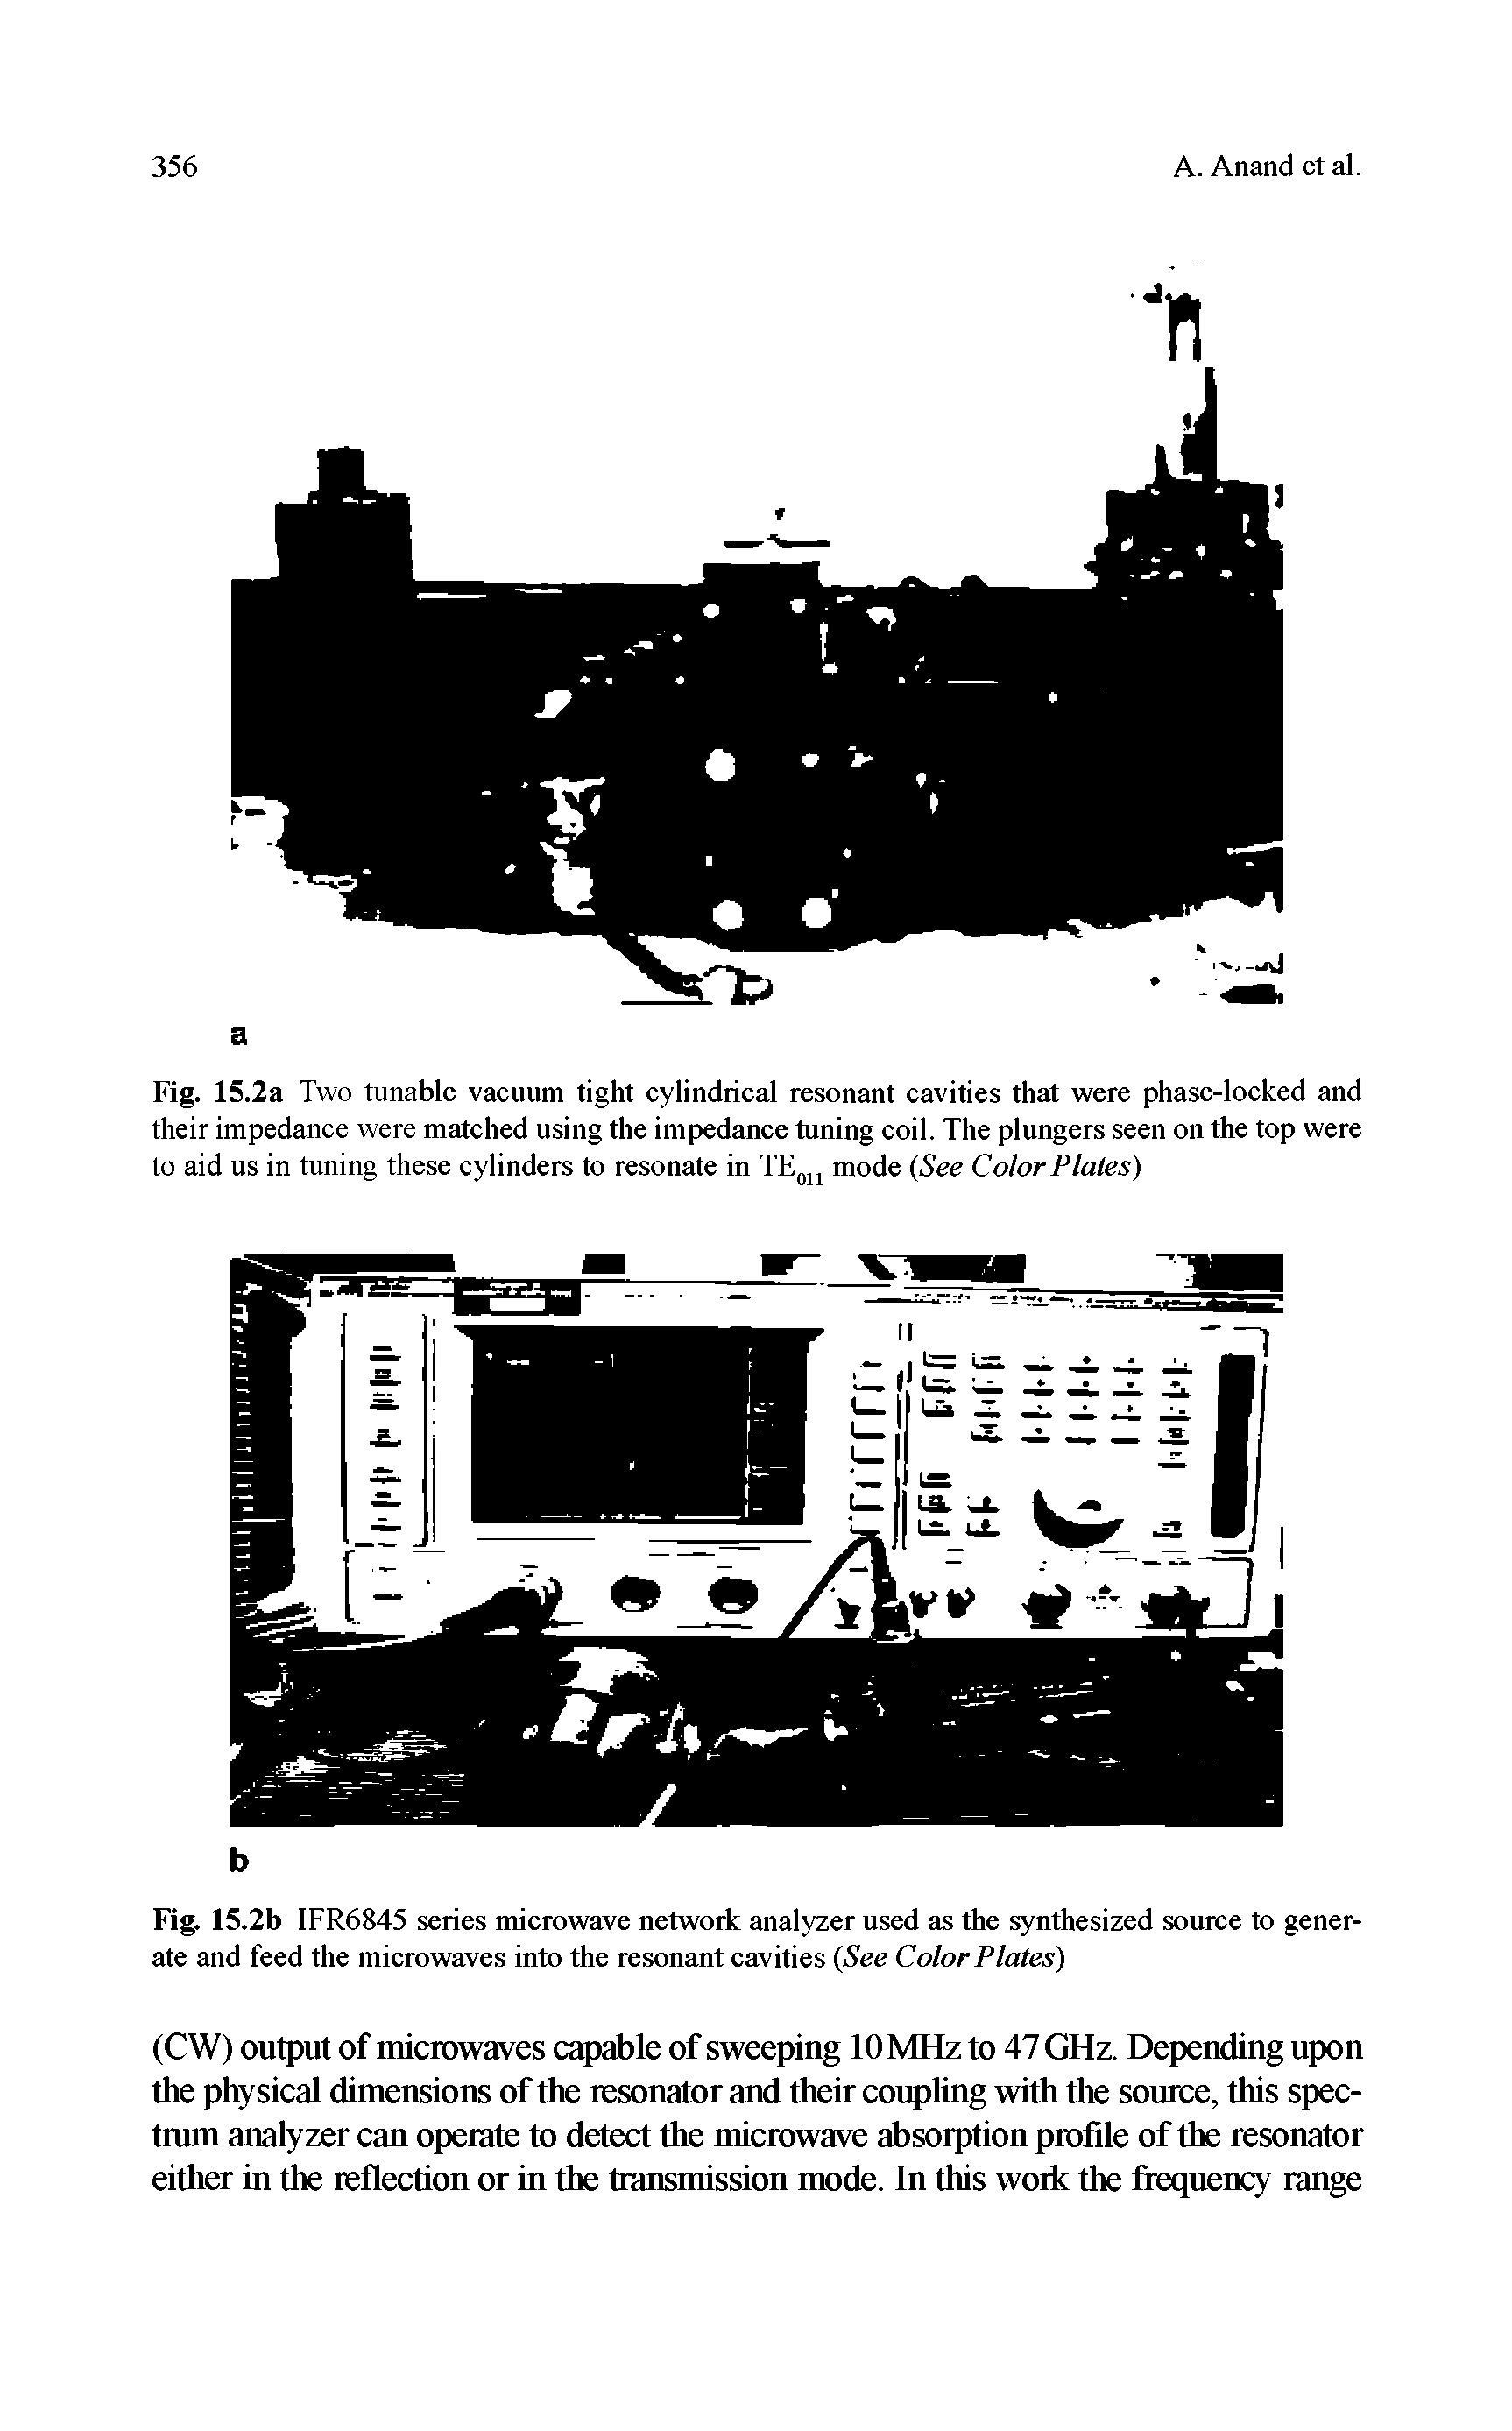 Fig. 15.2b IFR6845 series microwave network analyzer used as the synthesized source to generate and feed the microwaves into the resonant cavities (See Color Plates)...